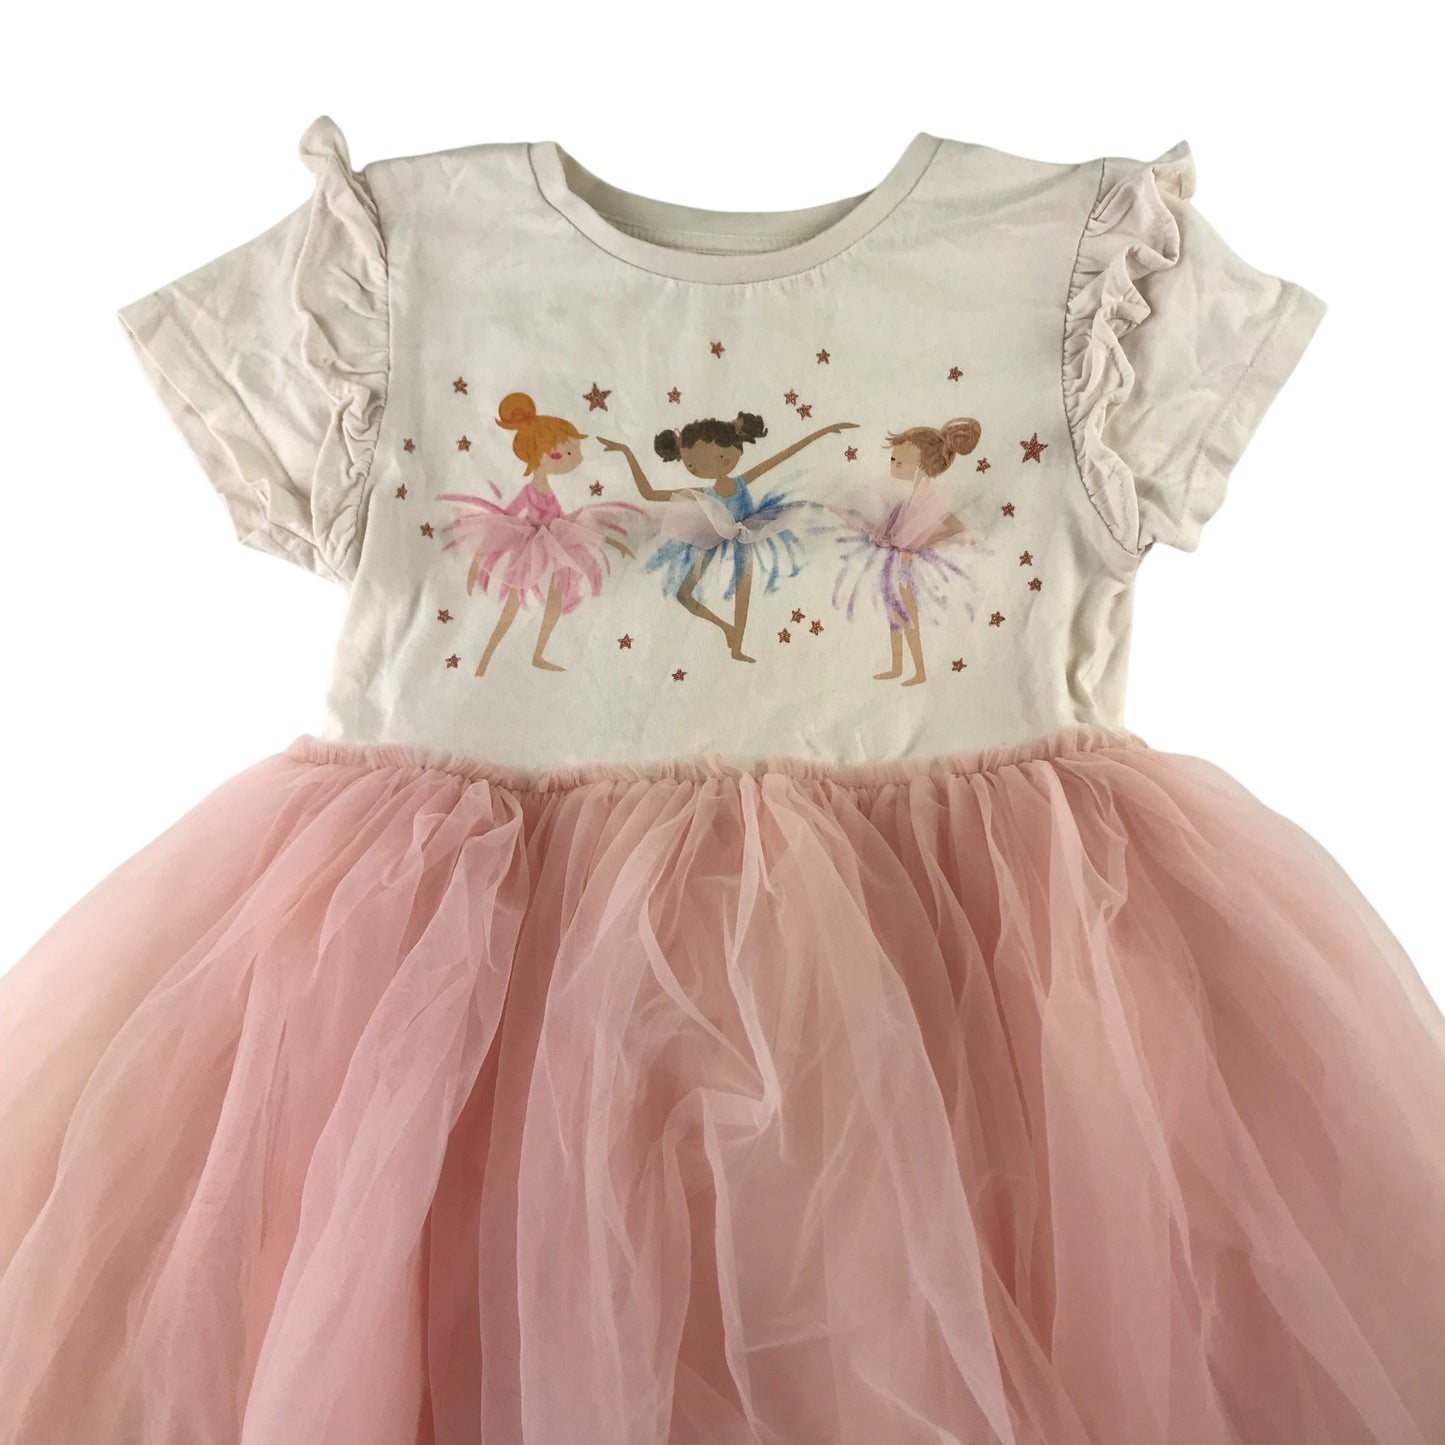 Next dress 6-7 years white and pink ballerina characters tulle skirt